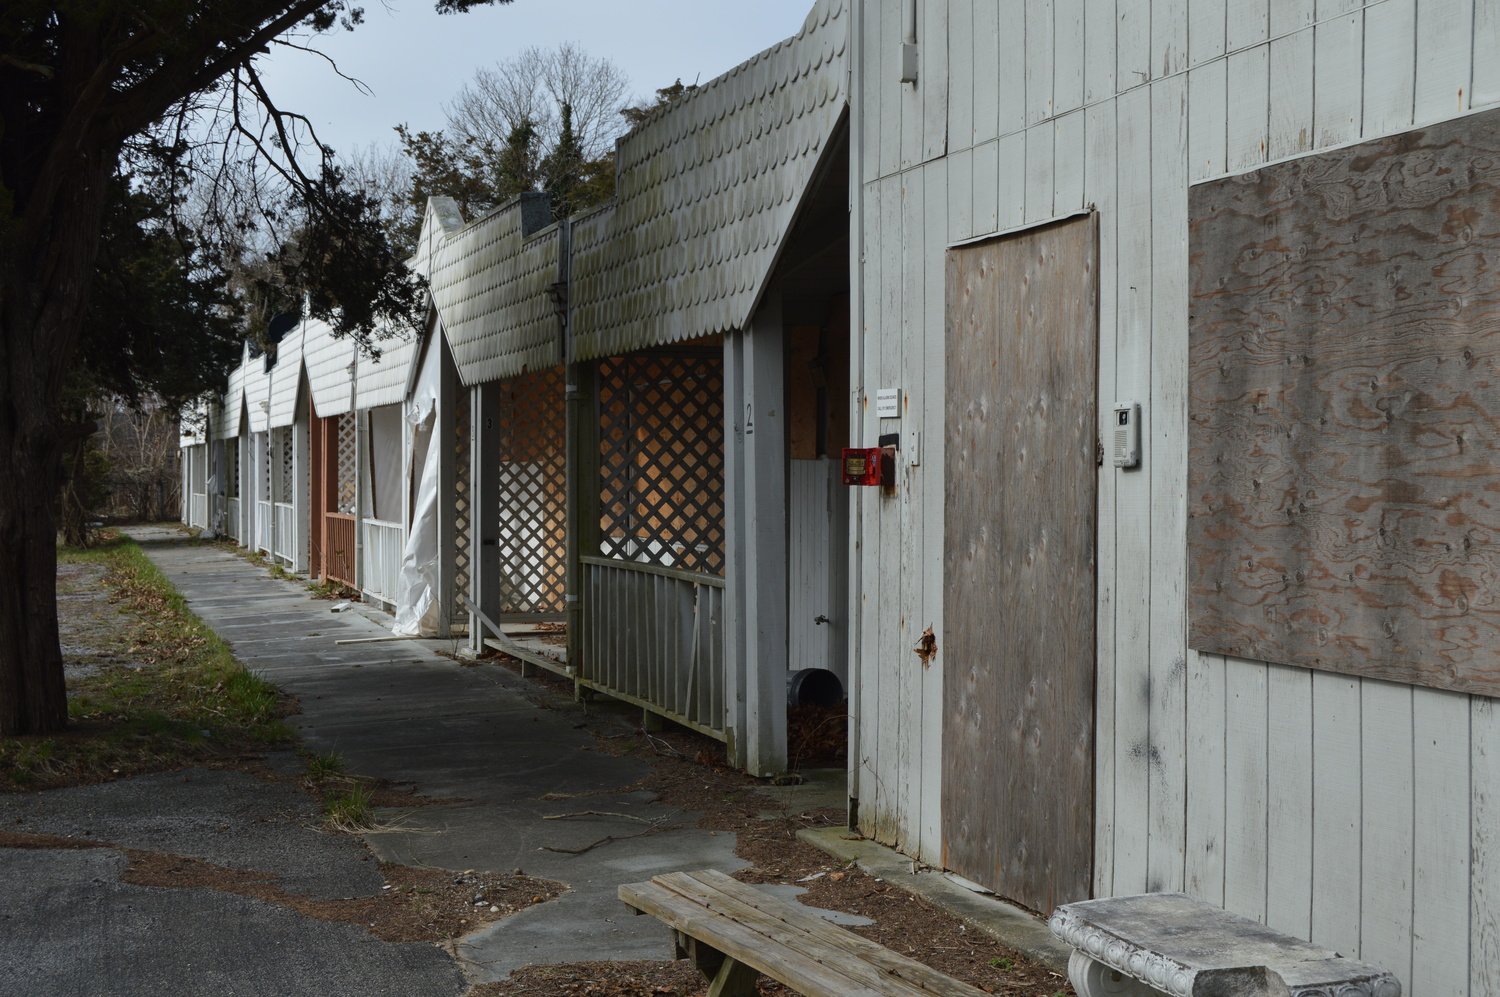 Bel-Aire Motel will likely be demolished to make way for a passive-use park. TOM GOGOLA